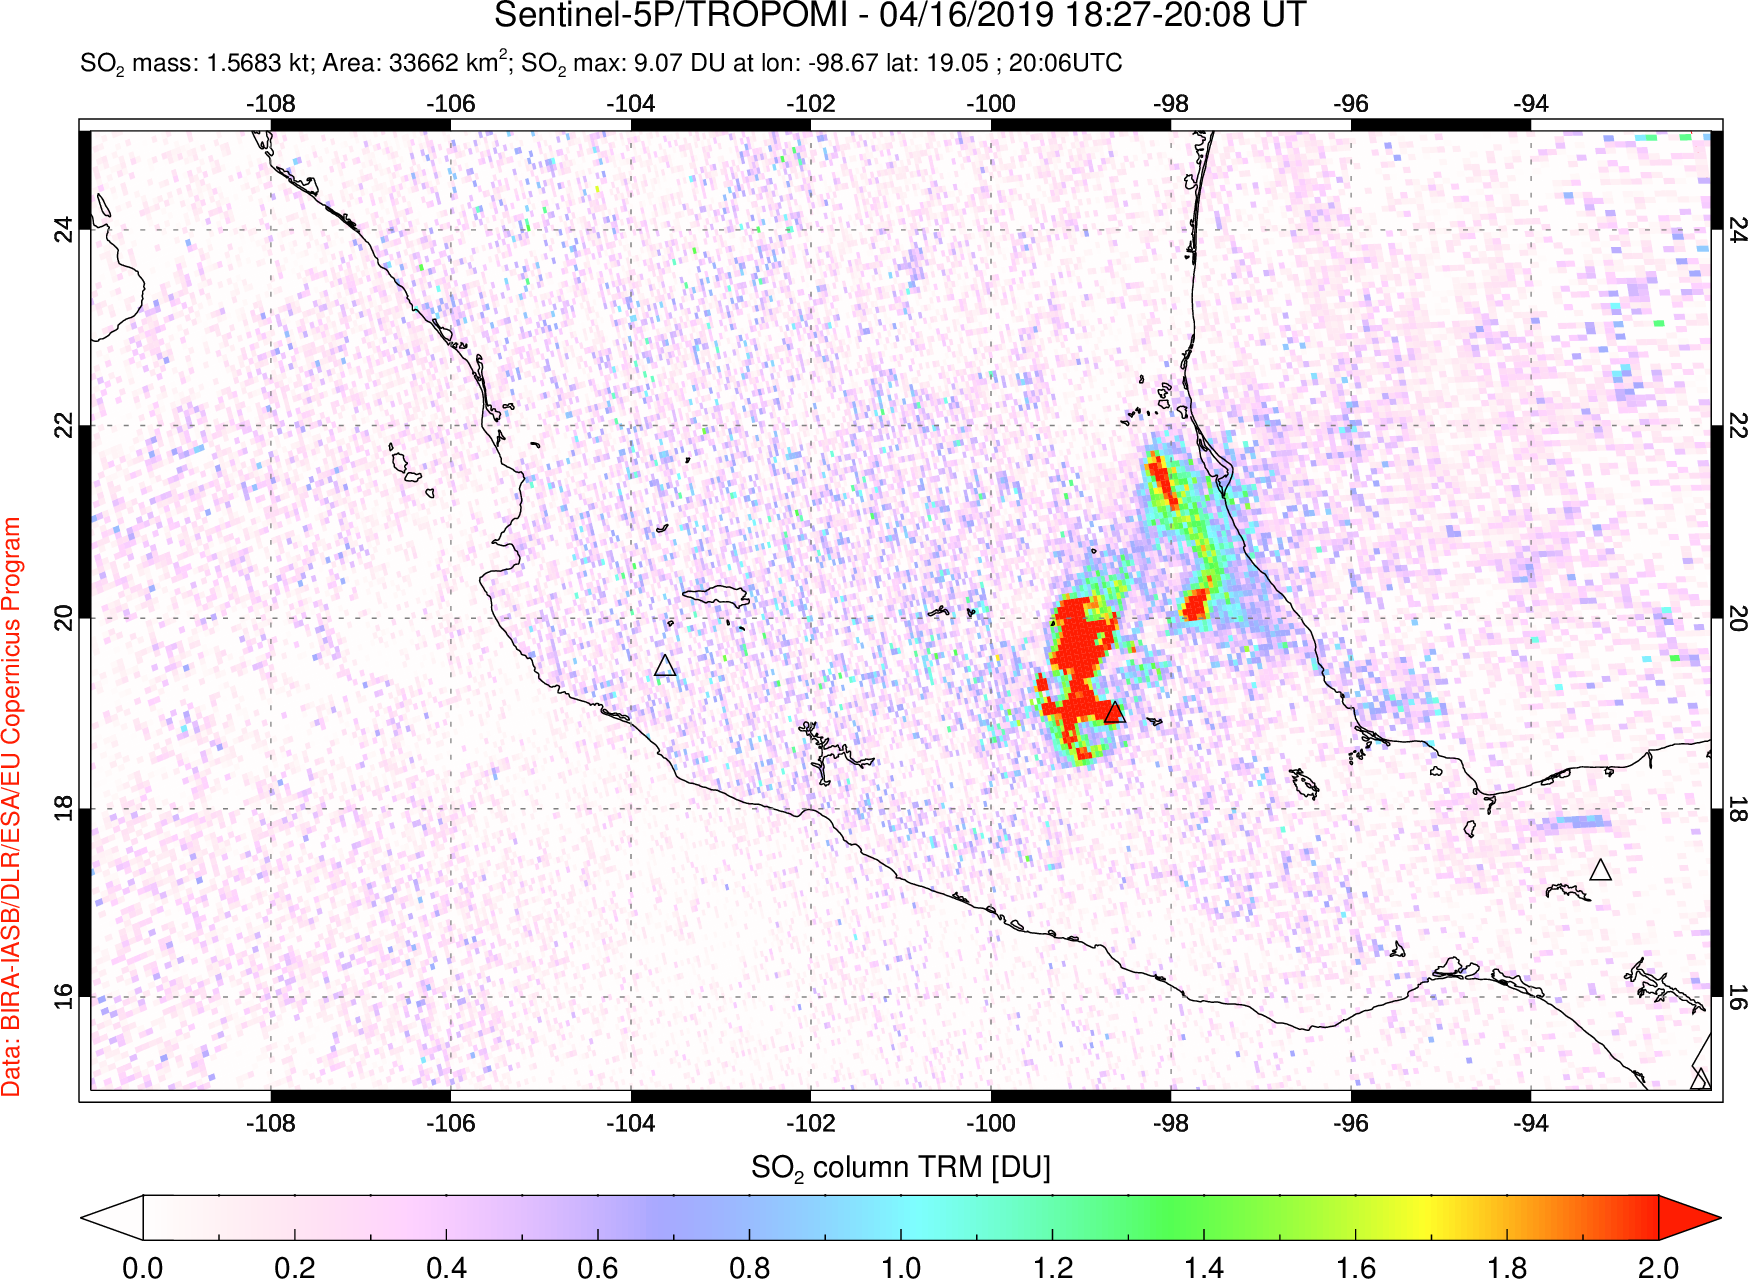 A sulfur dioxide image over Mexico on Apr 16, 2019.